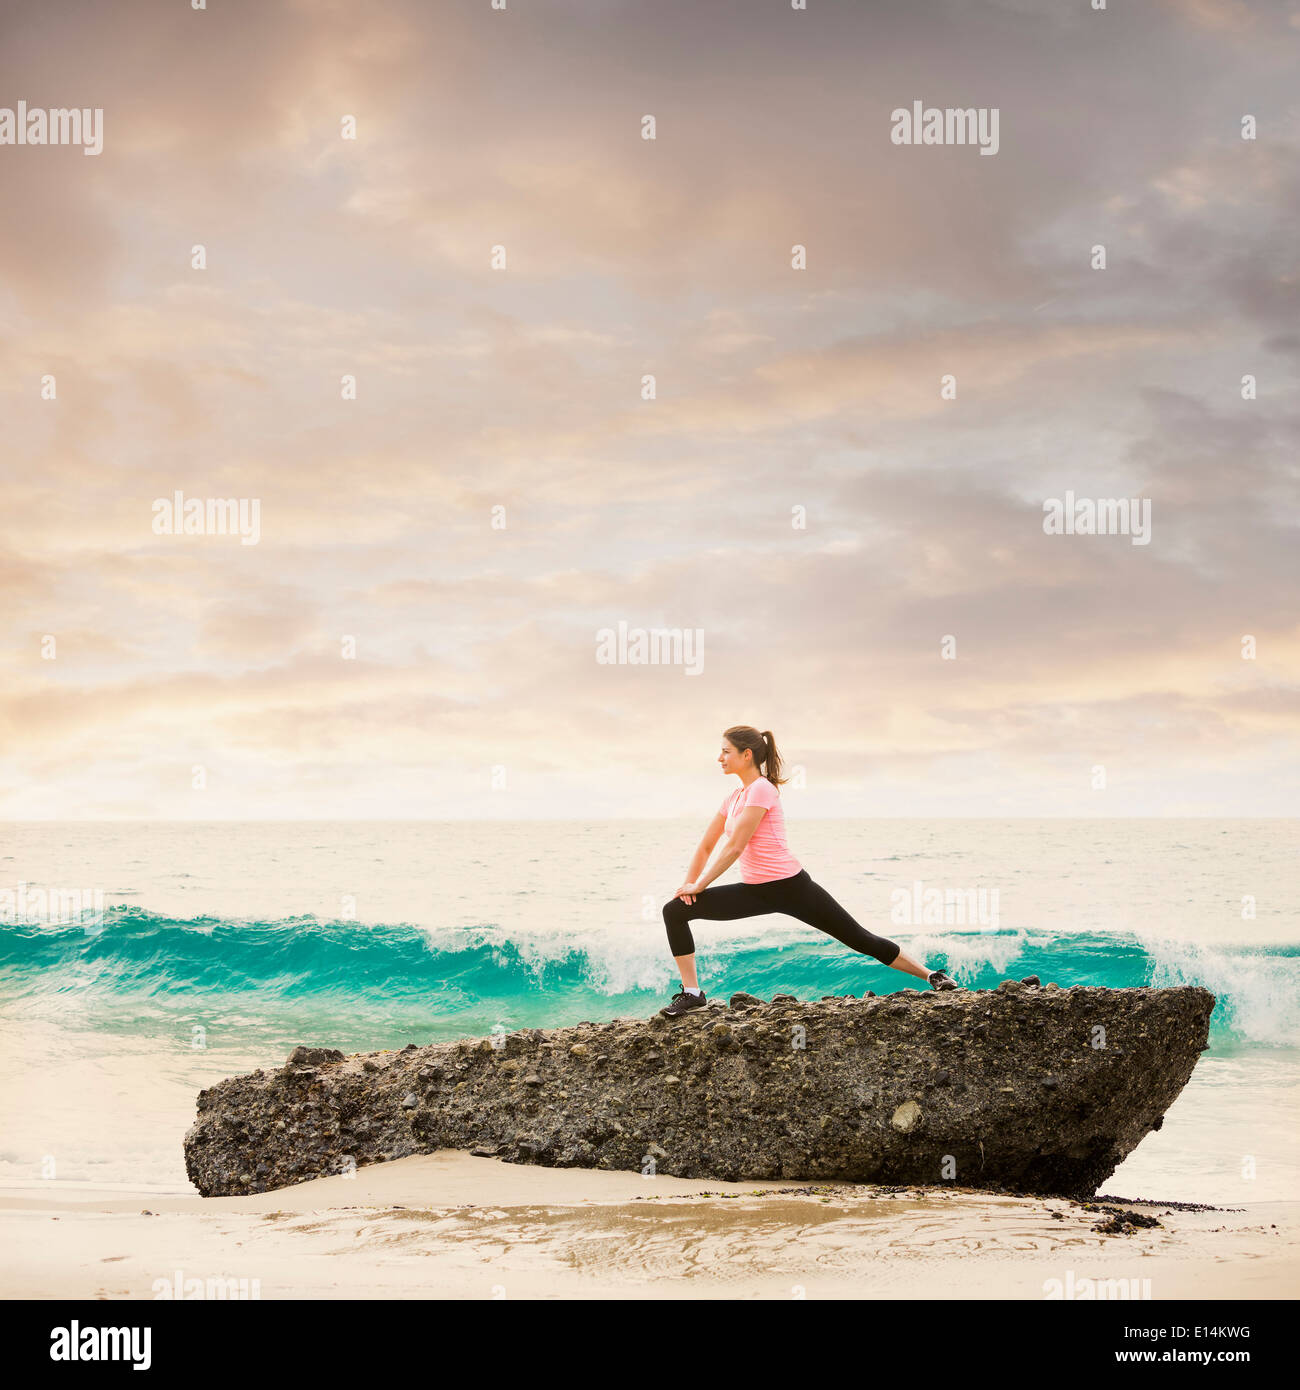 Caucasian runner stretching on beach Banque D'Images